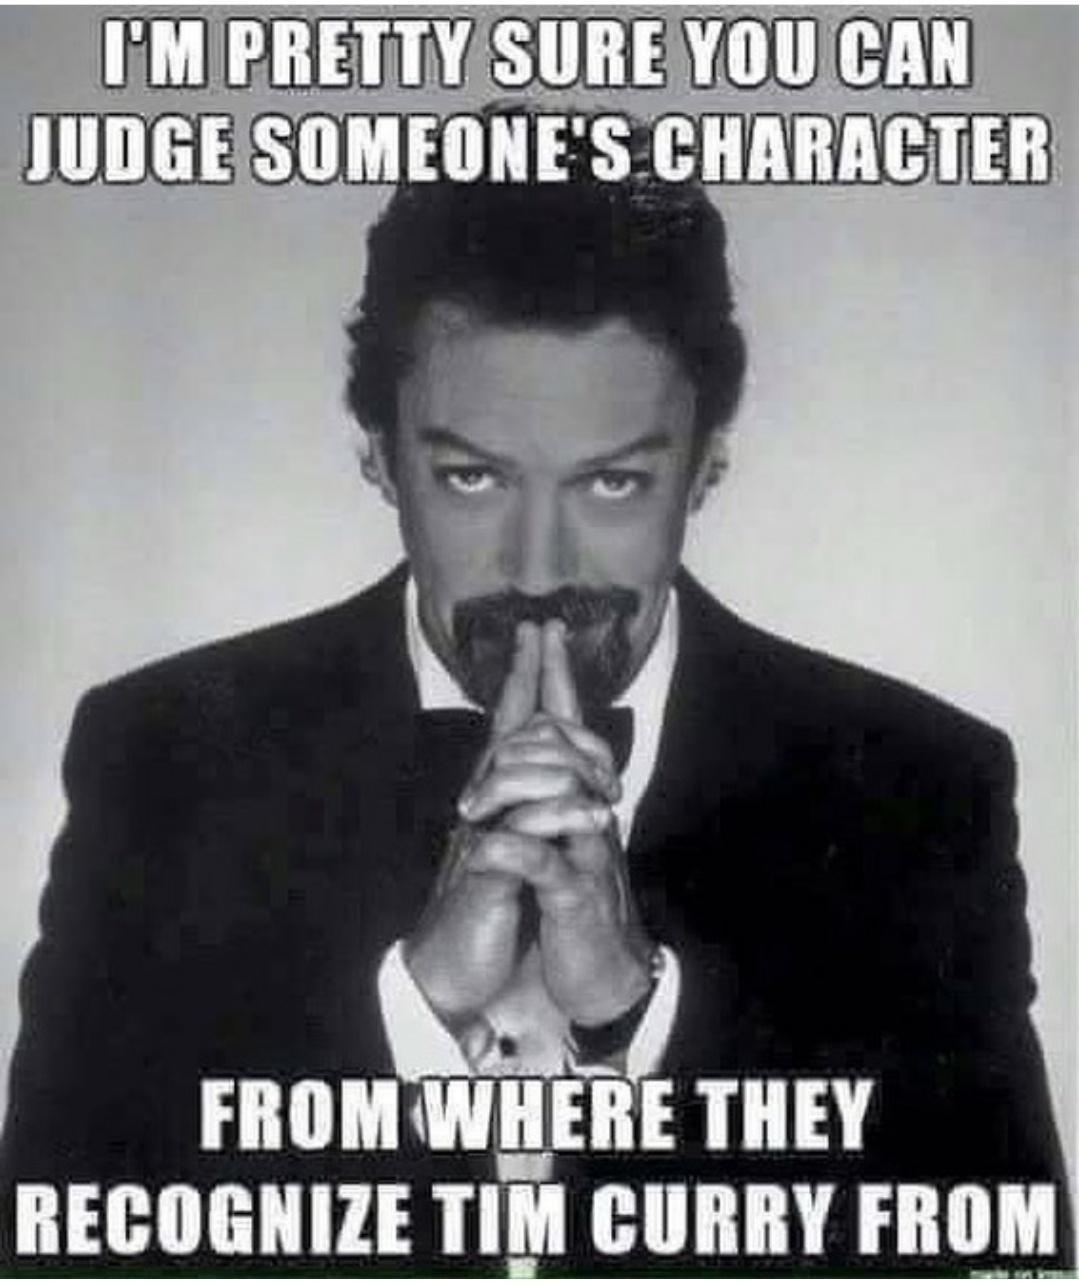 tim curry clue - I'M Pretty Sure You Can Judge Someone'S Character From Where They Recognize Tim Curry From